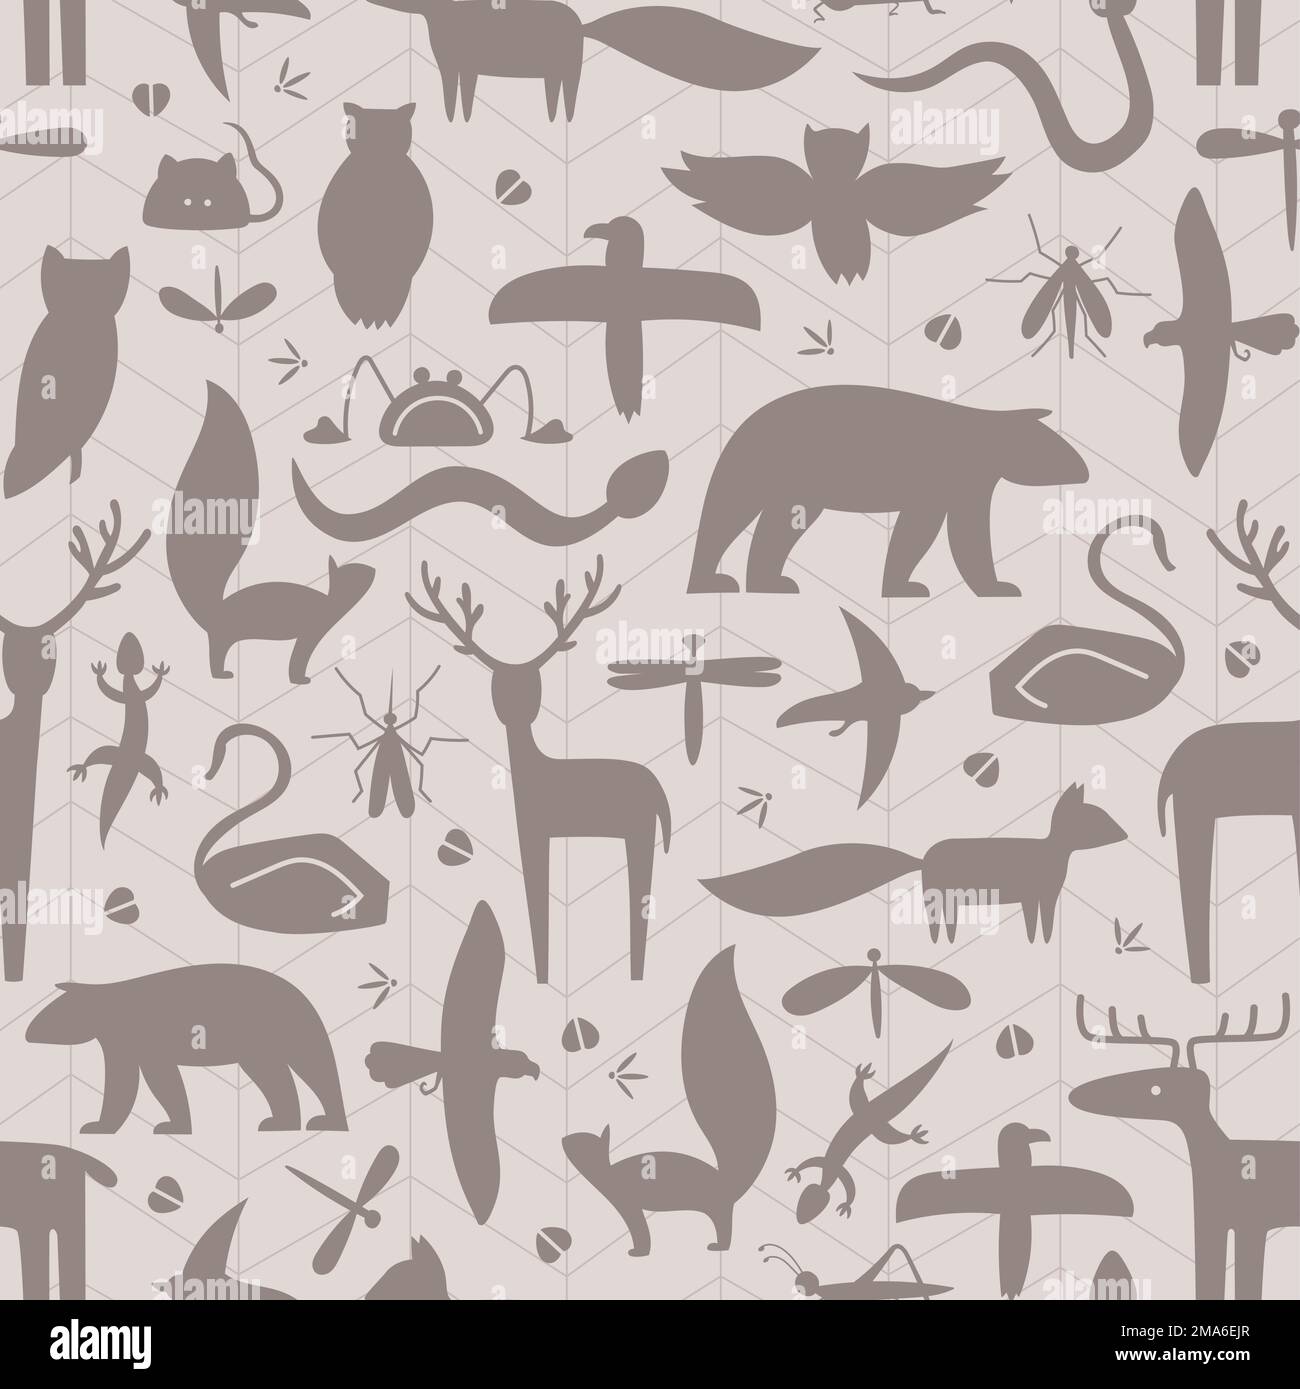 Brown shape of wild forester animals vector seamless pattern. Can use for fabric, web background. Stock Vector